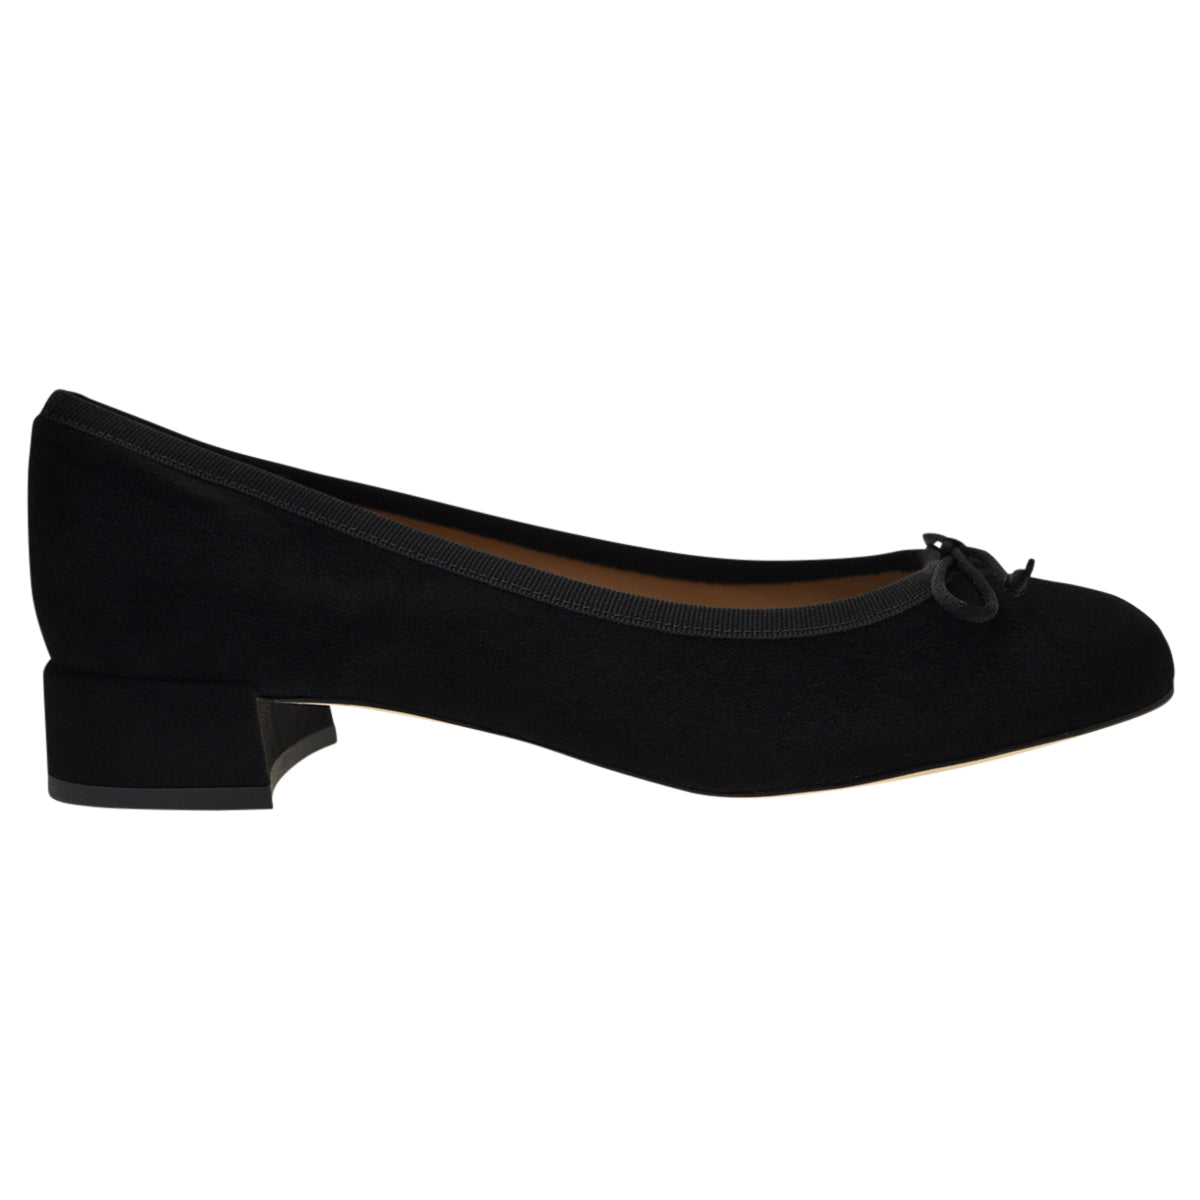 Black suede ballet flats with a small heel.